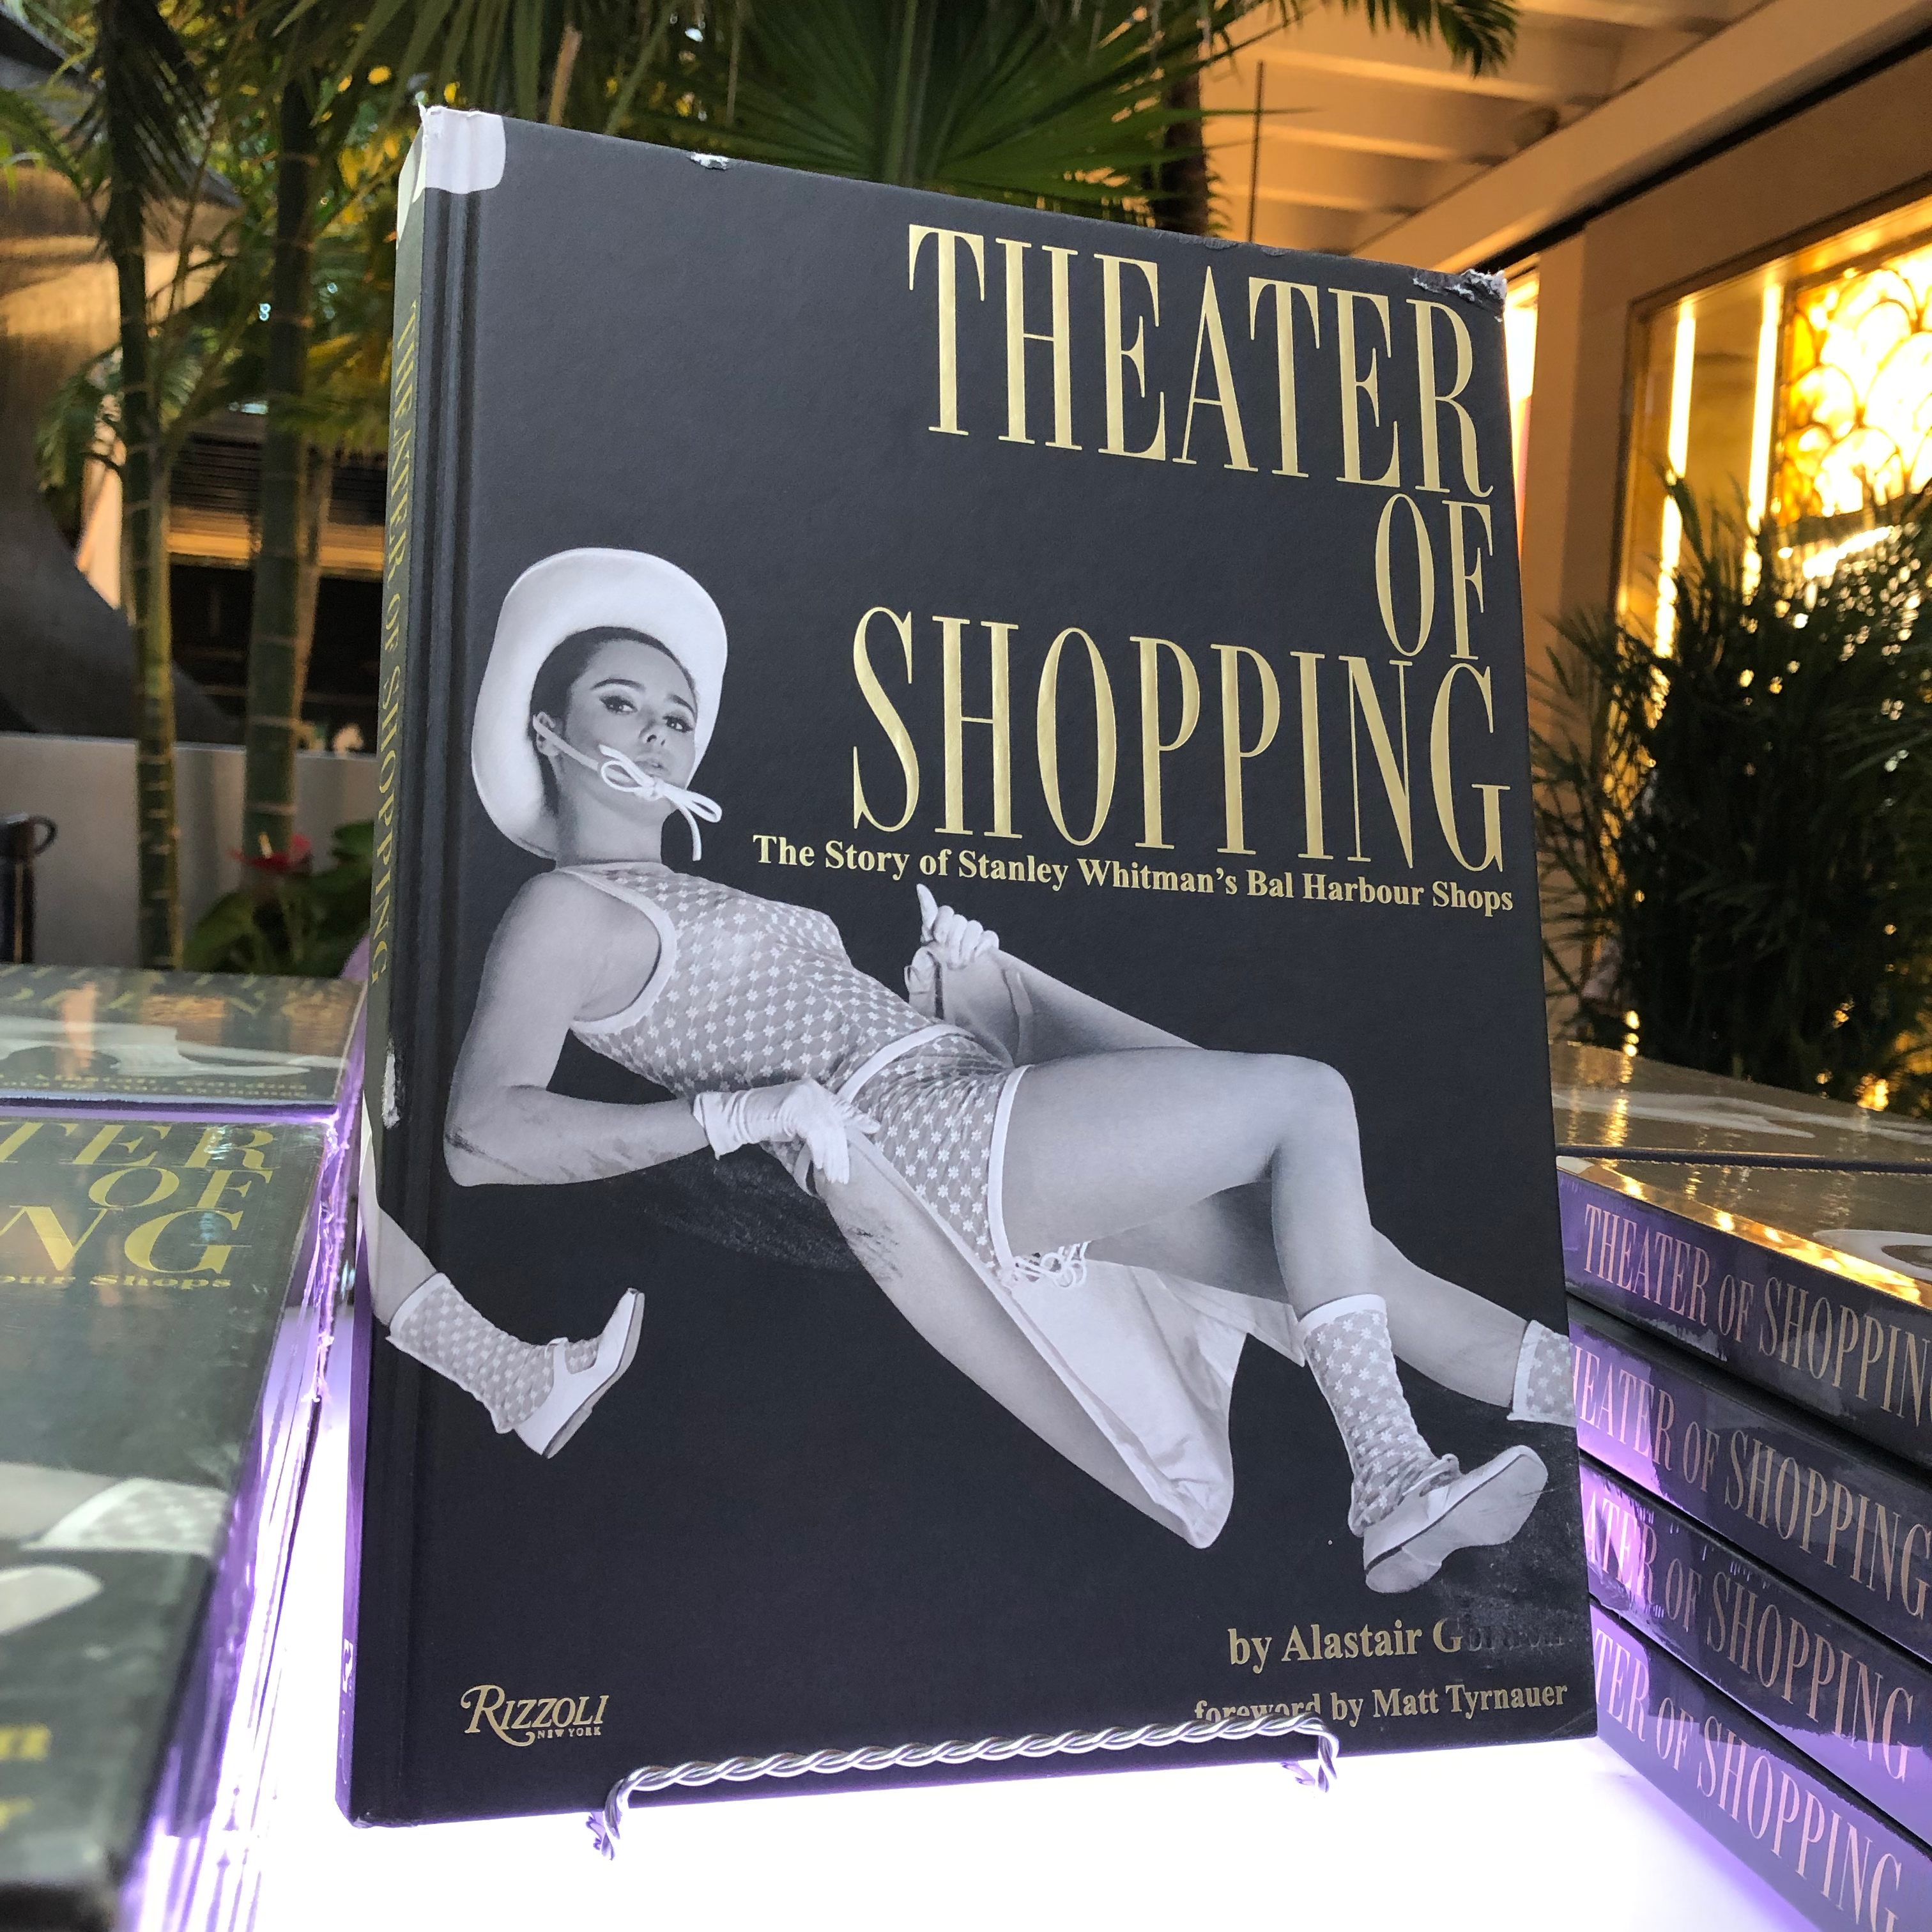 Theater of Shopping: The Story of Stanley Whitman's Bal Harbour Shops published by Rizzoli